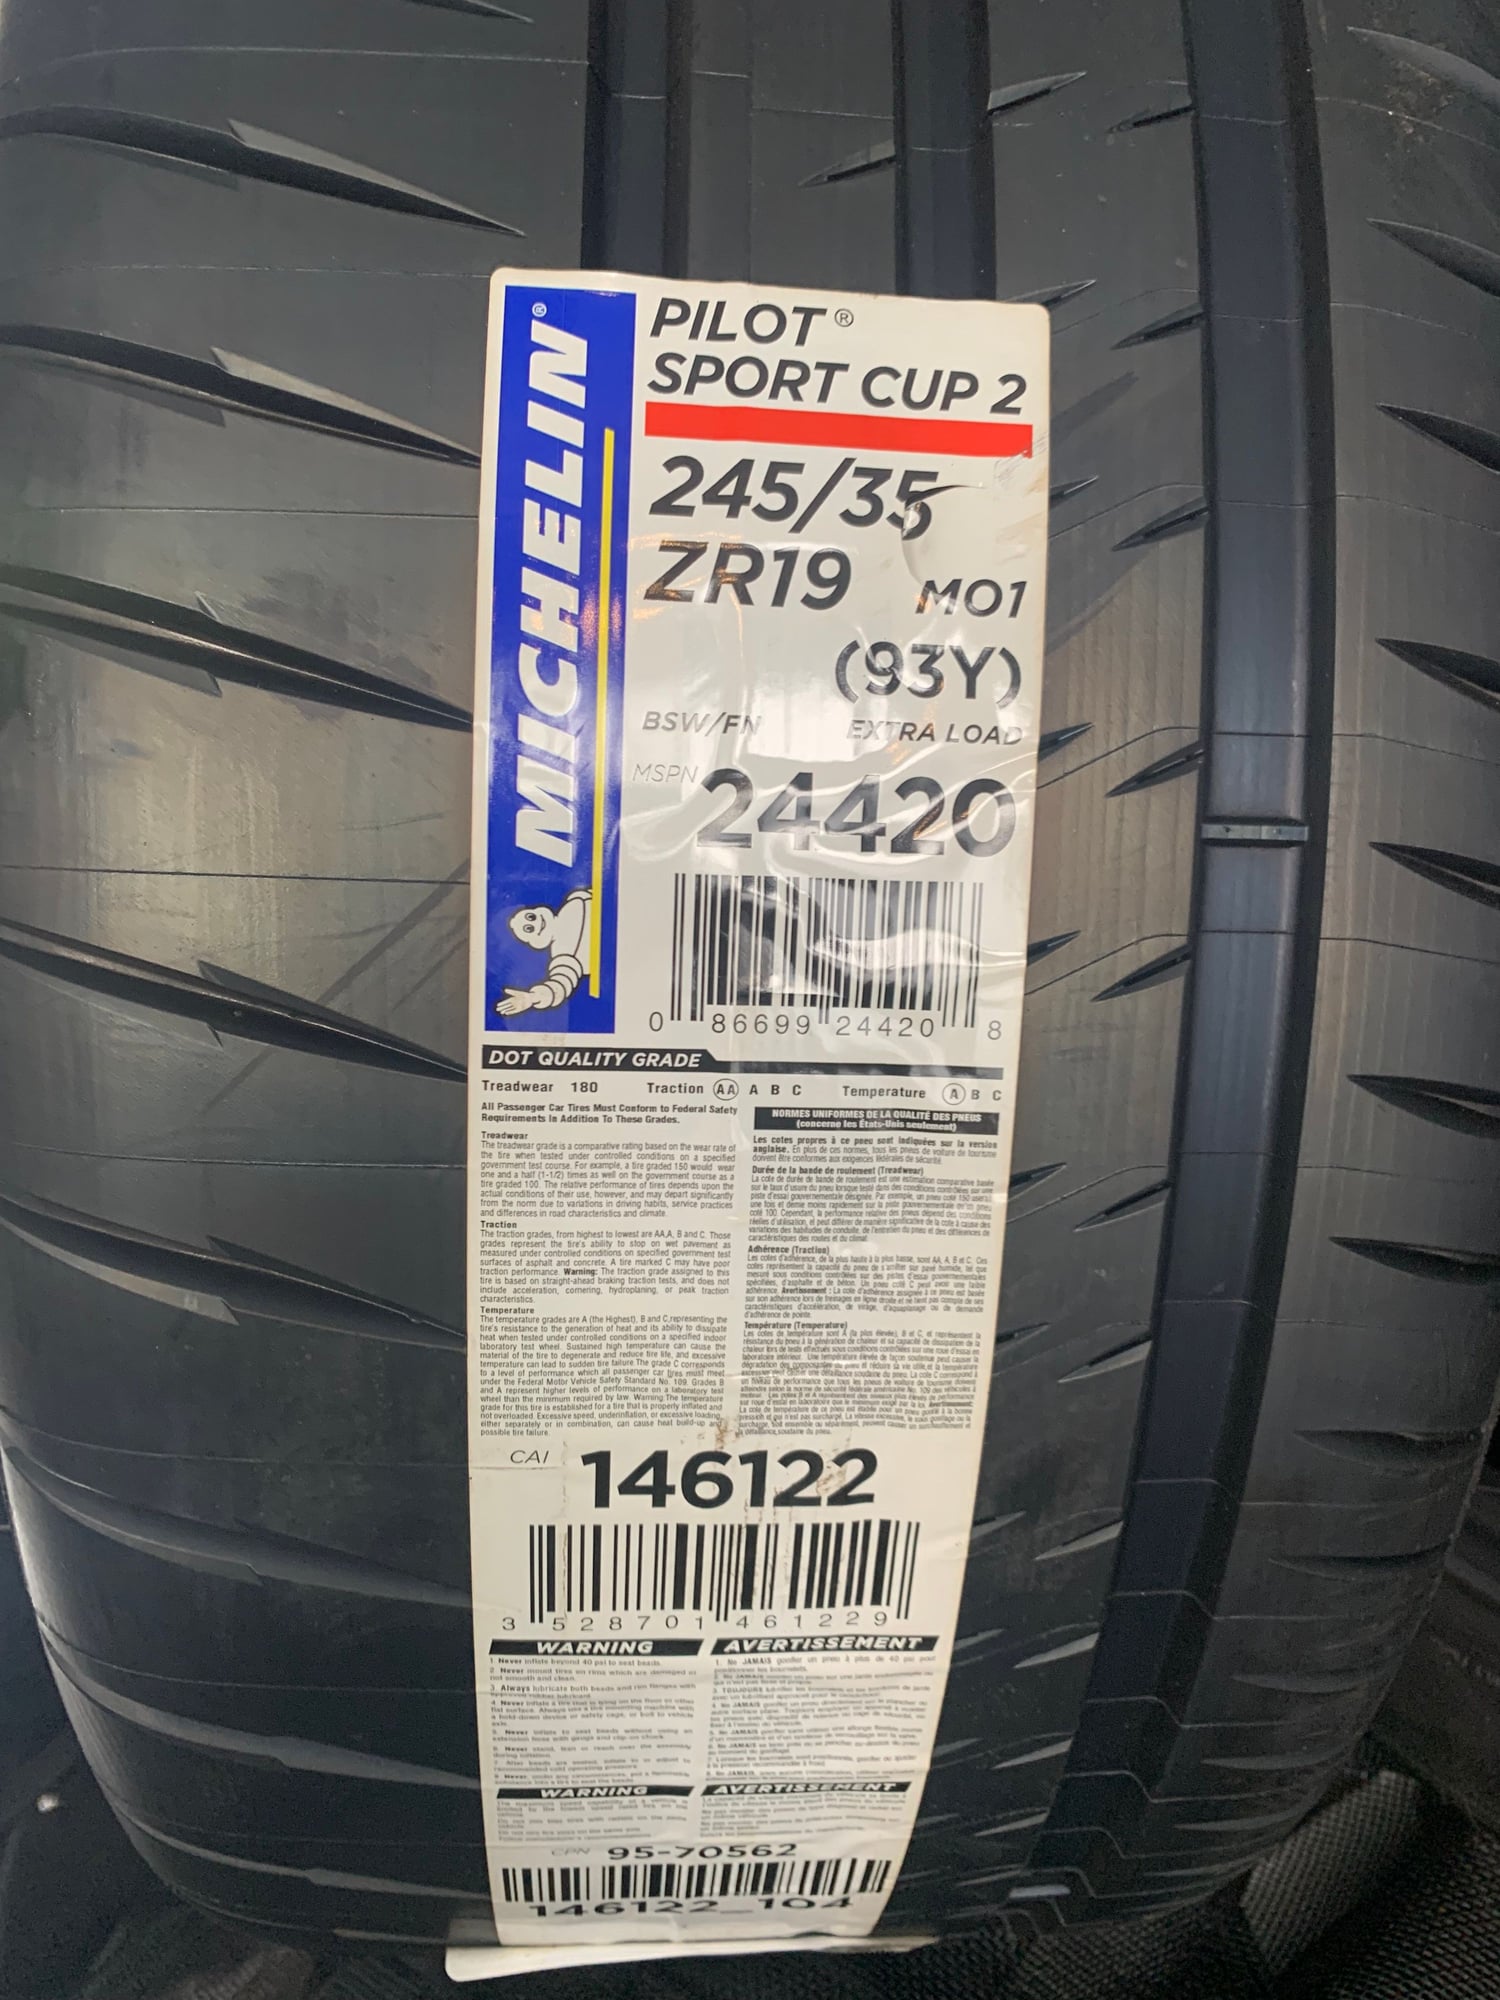 Wheels and Tires/Axles - Brand New Michelin Pilot Sport Cup 2 19” 205 Sedan Set of 4 - New - 2015 to 2021 Mercedes-Benz C63 AMG S - 2015 to 2021 Mercedes-Benz C63 AMG - Lake Forest, CA 92630, United States